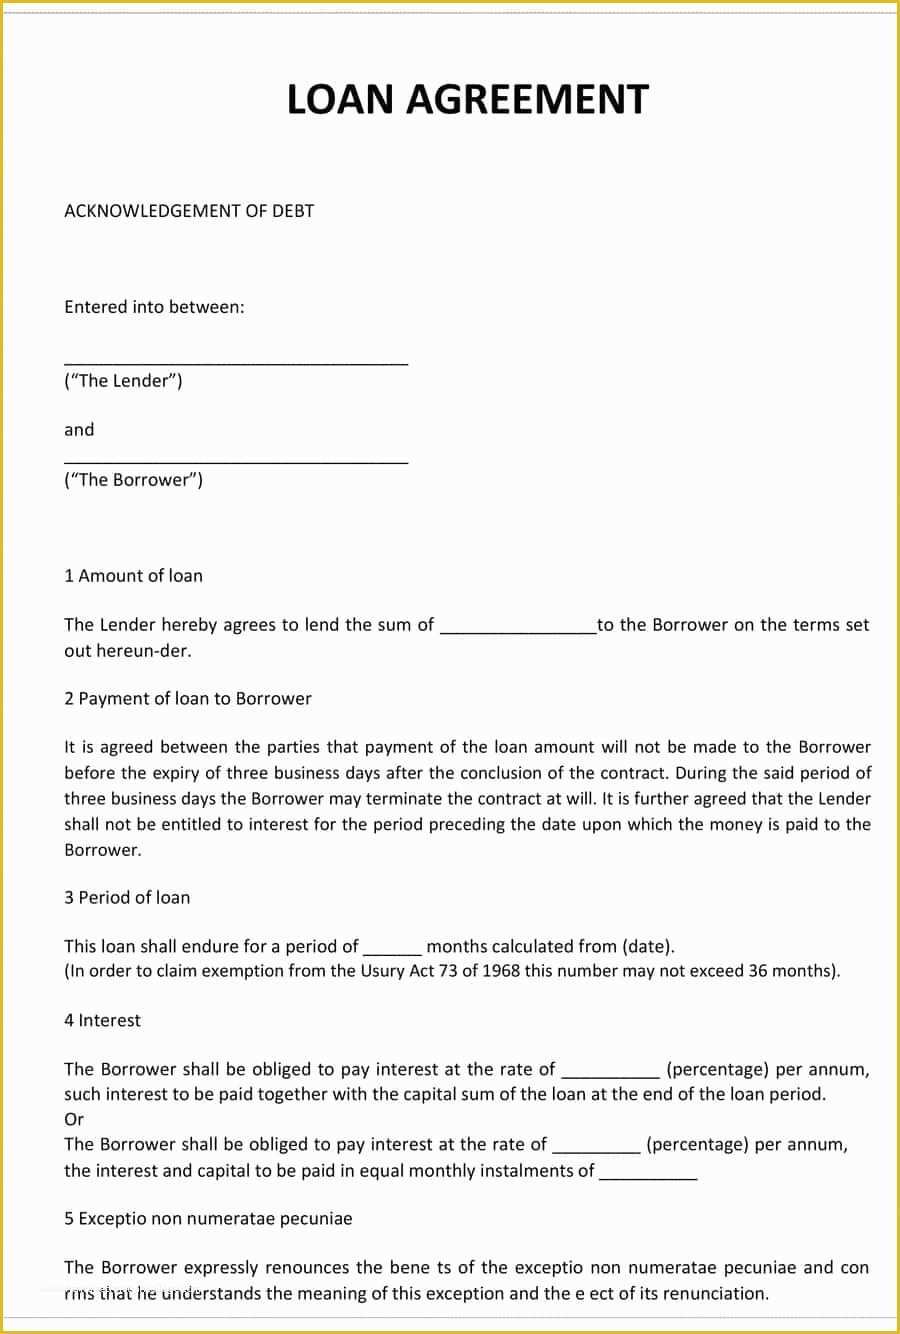 Free Online Loan Agreement Template Of 40 Free Loan Agreement Templates [word & Pdf] Template Lab